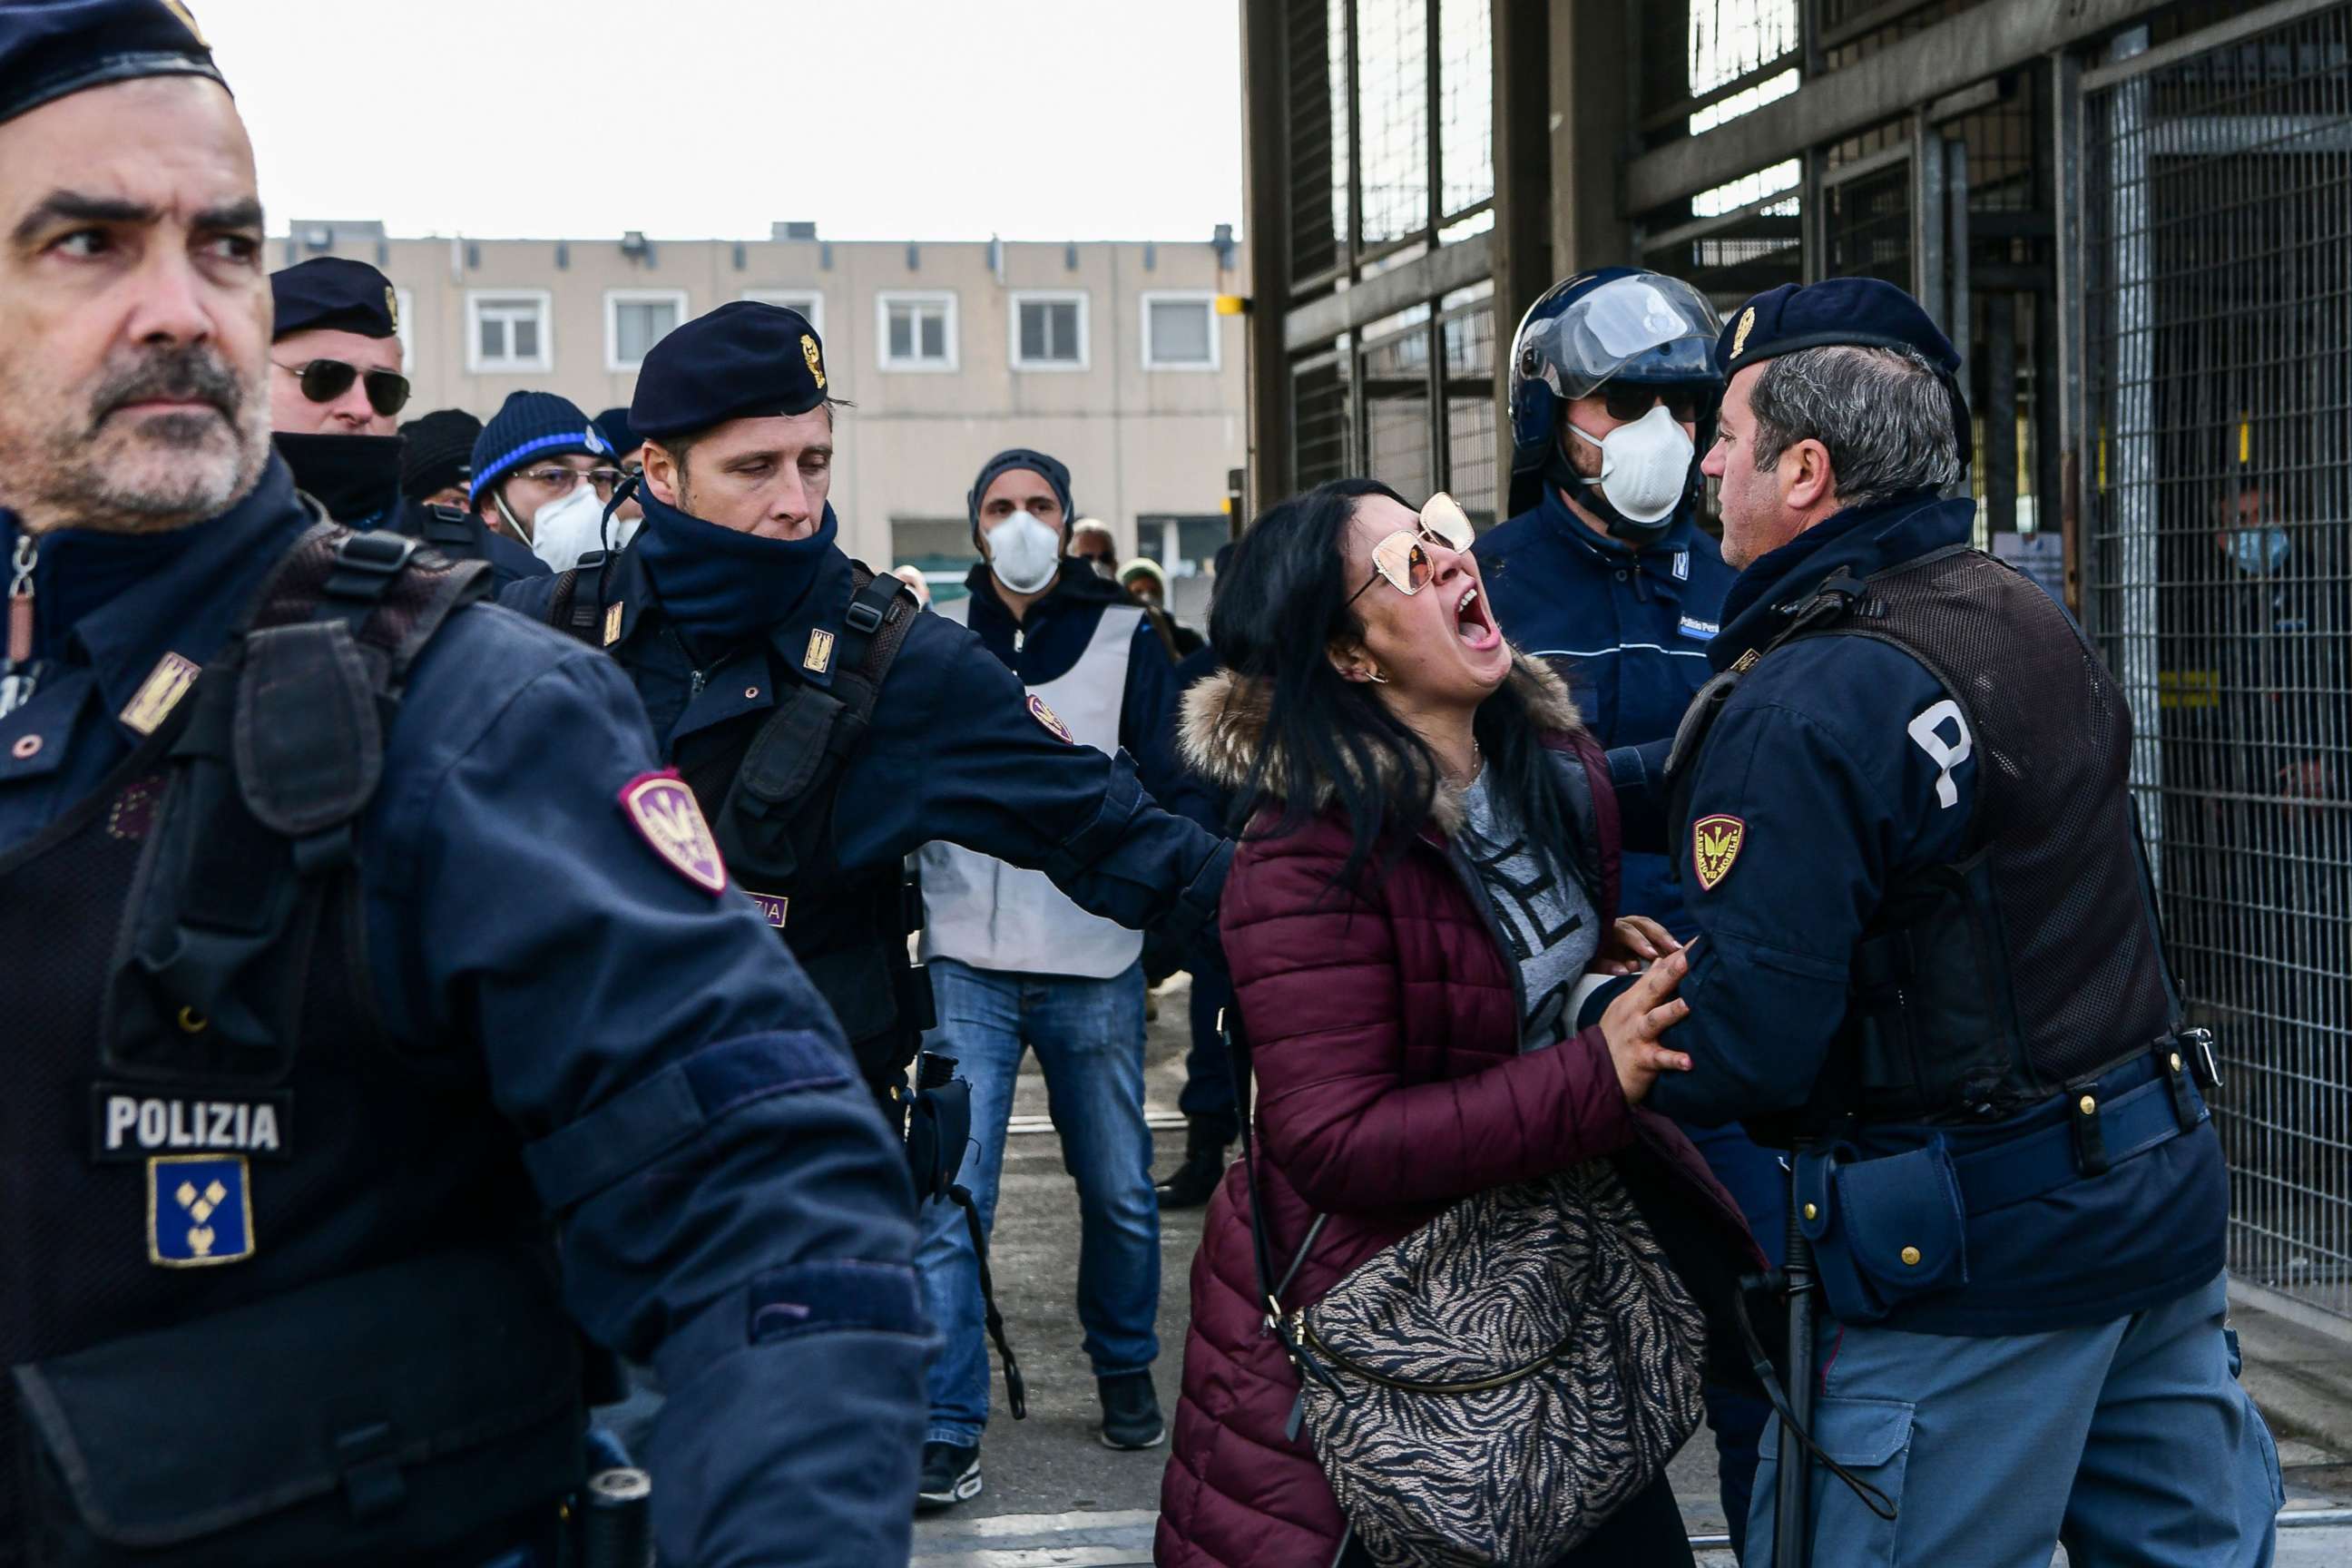 PHOTO: Police officers hold off an inmate's relative shouting in protest outside the SantAnna prison in Modena, Emilia-Romagna, in one of Italy's quarantine red zones on March 9, 2020.